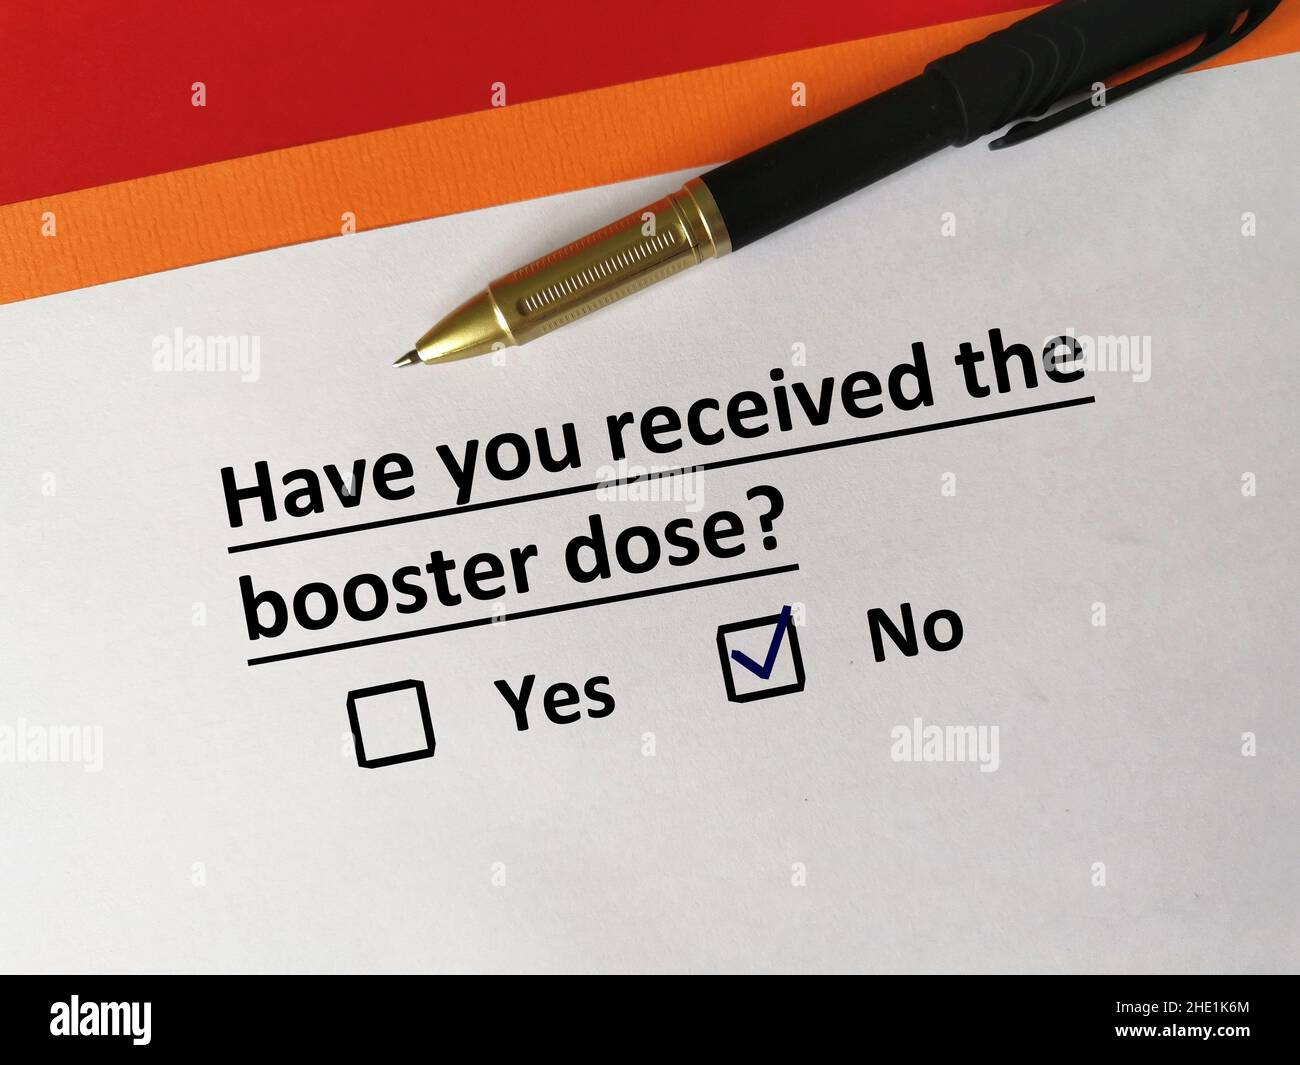 One person is answering question about vaccines. The person does not receive the booster dose. Stock Photo